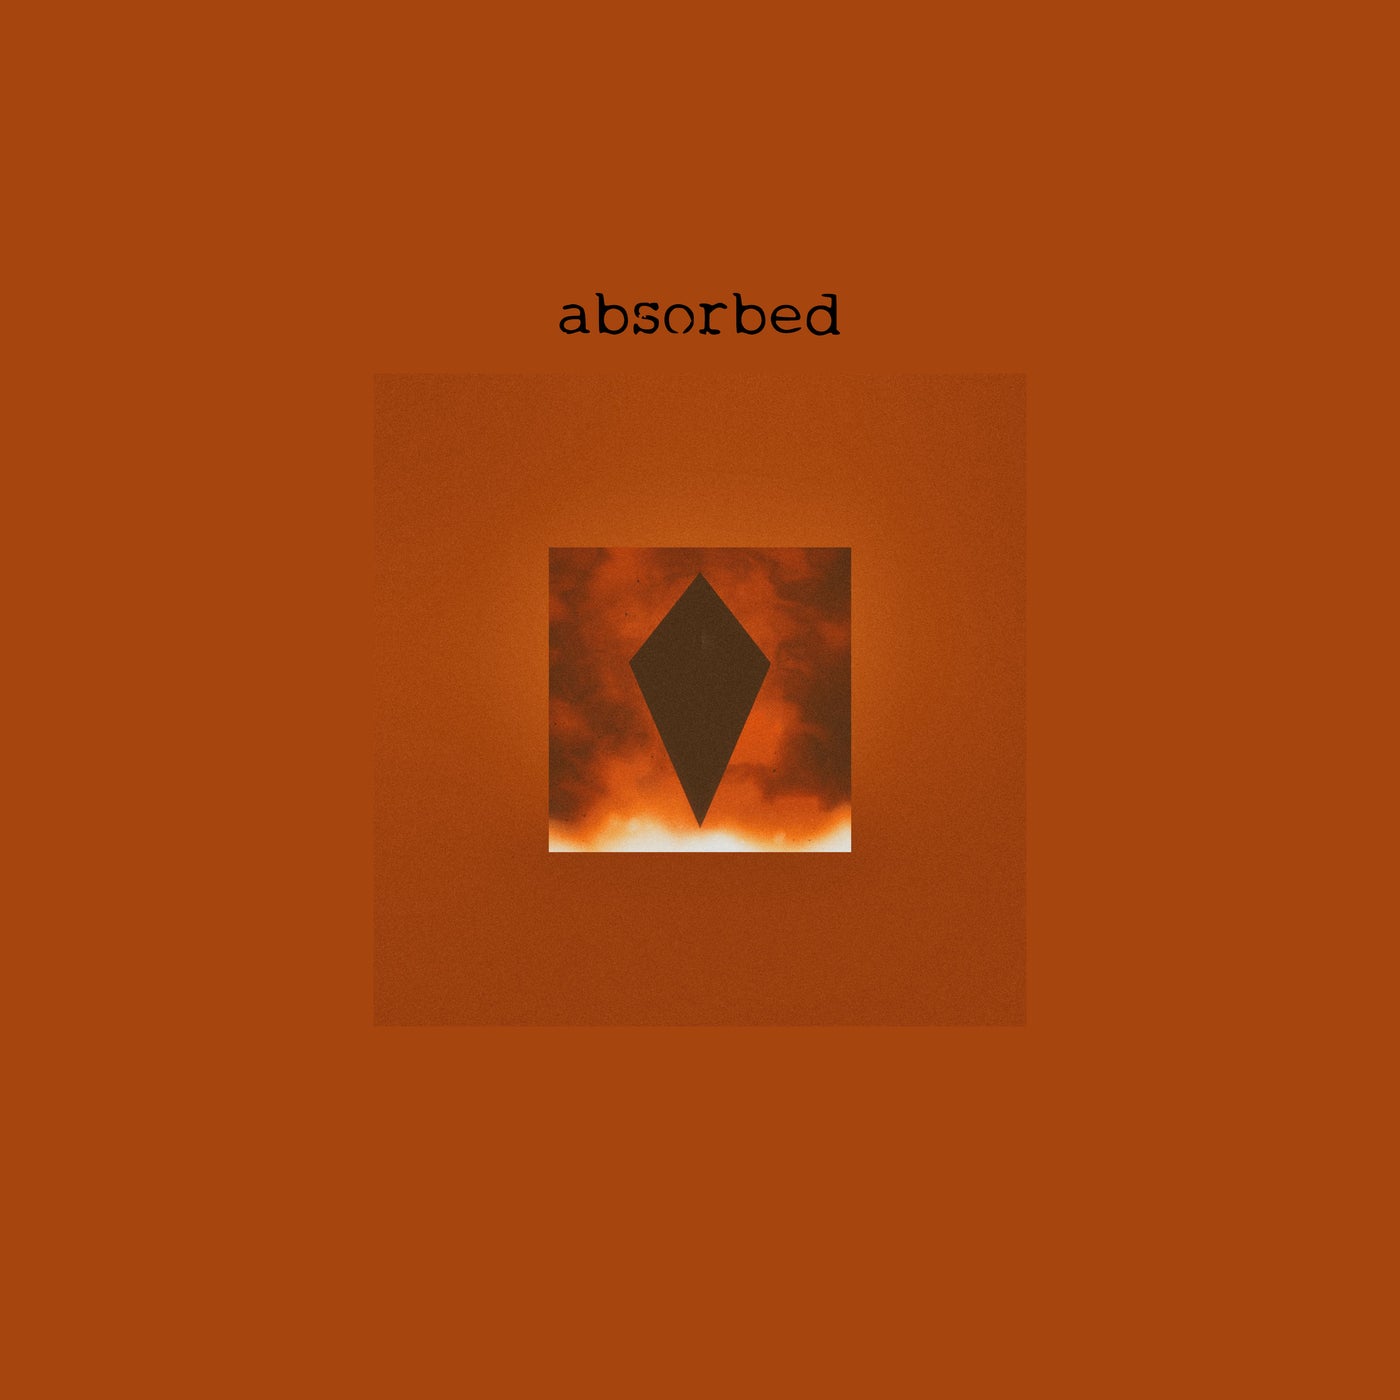 Absorbed